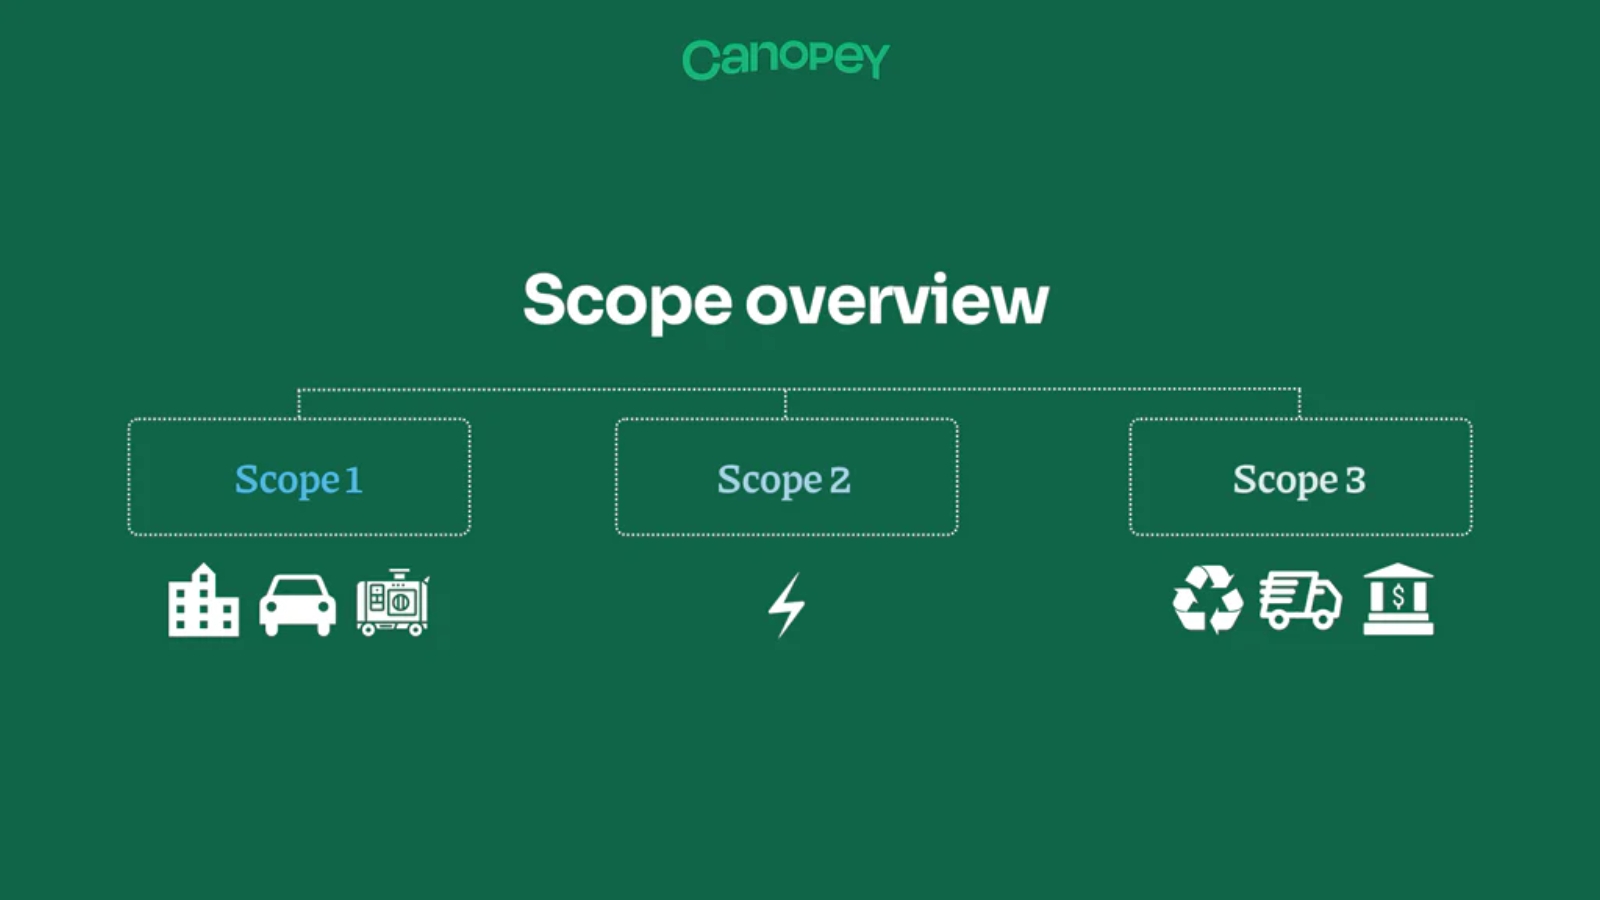 A graphic showing scopes 1, 2 and 3. Scope 1 has a building, car and generator below it, scope 2 has an energy icon underneath, and scope 3 has the recycling symbol, delivery van and bank icons